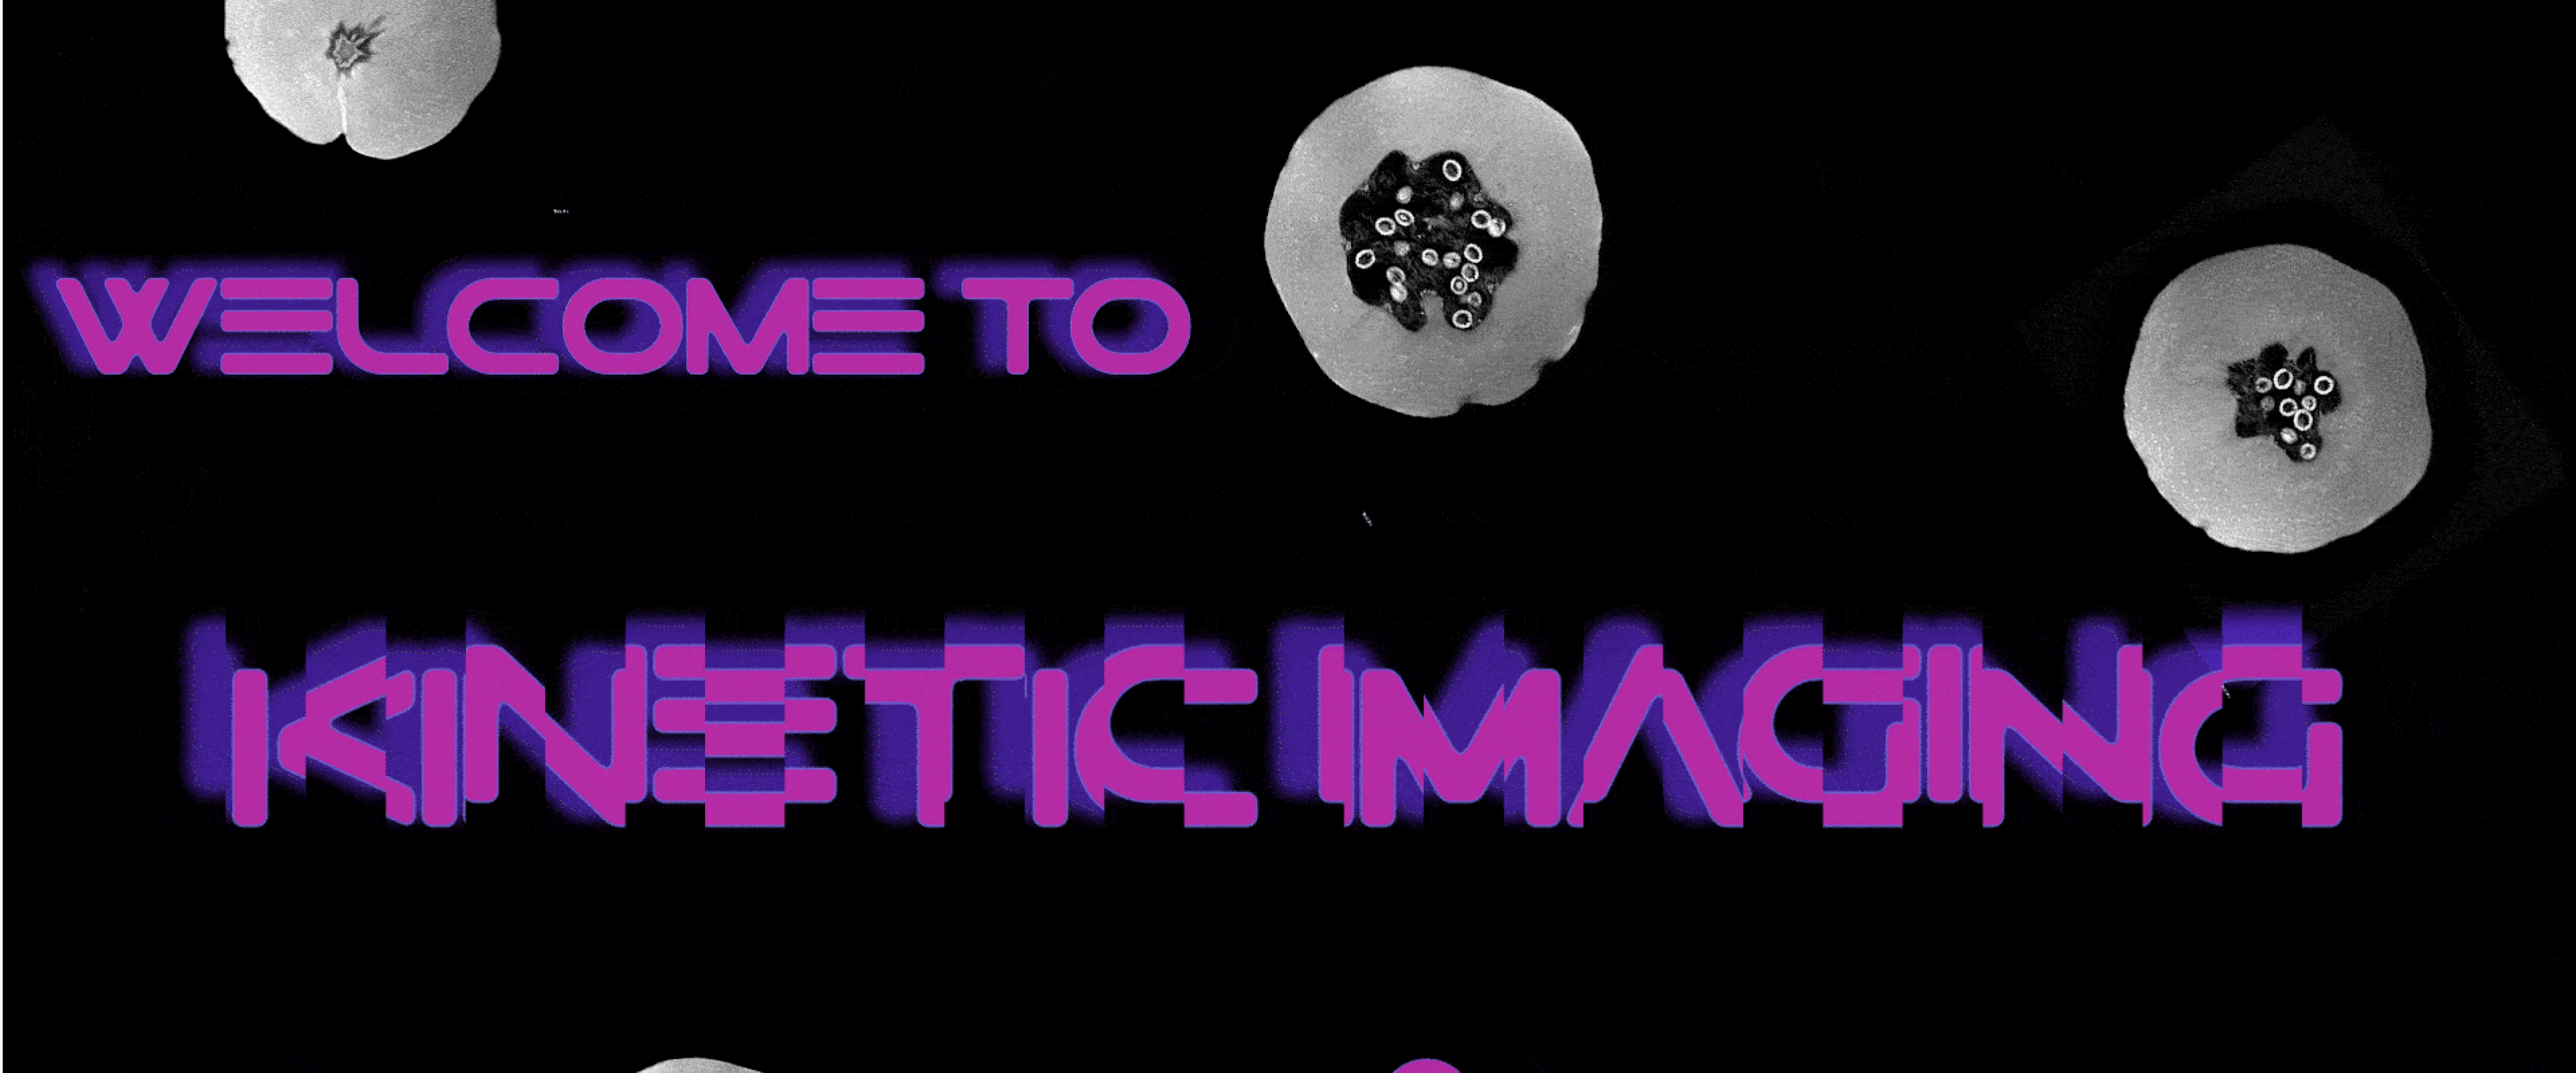 . in Kinetic Imaging with an Emphasis in Animation | Frostic School of  Art | Western Michigan University